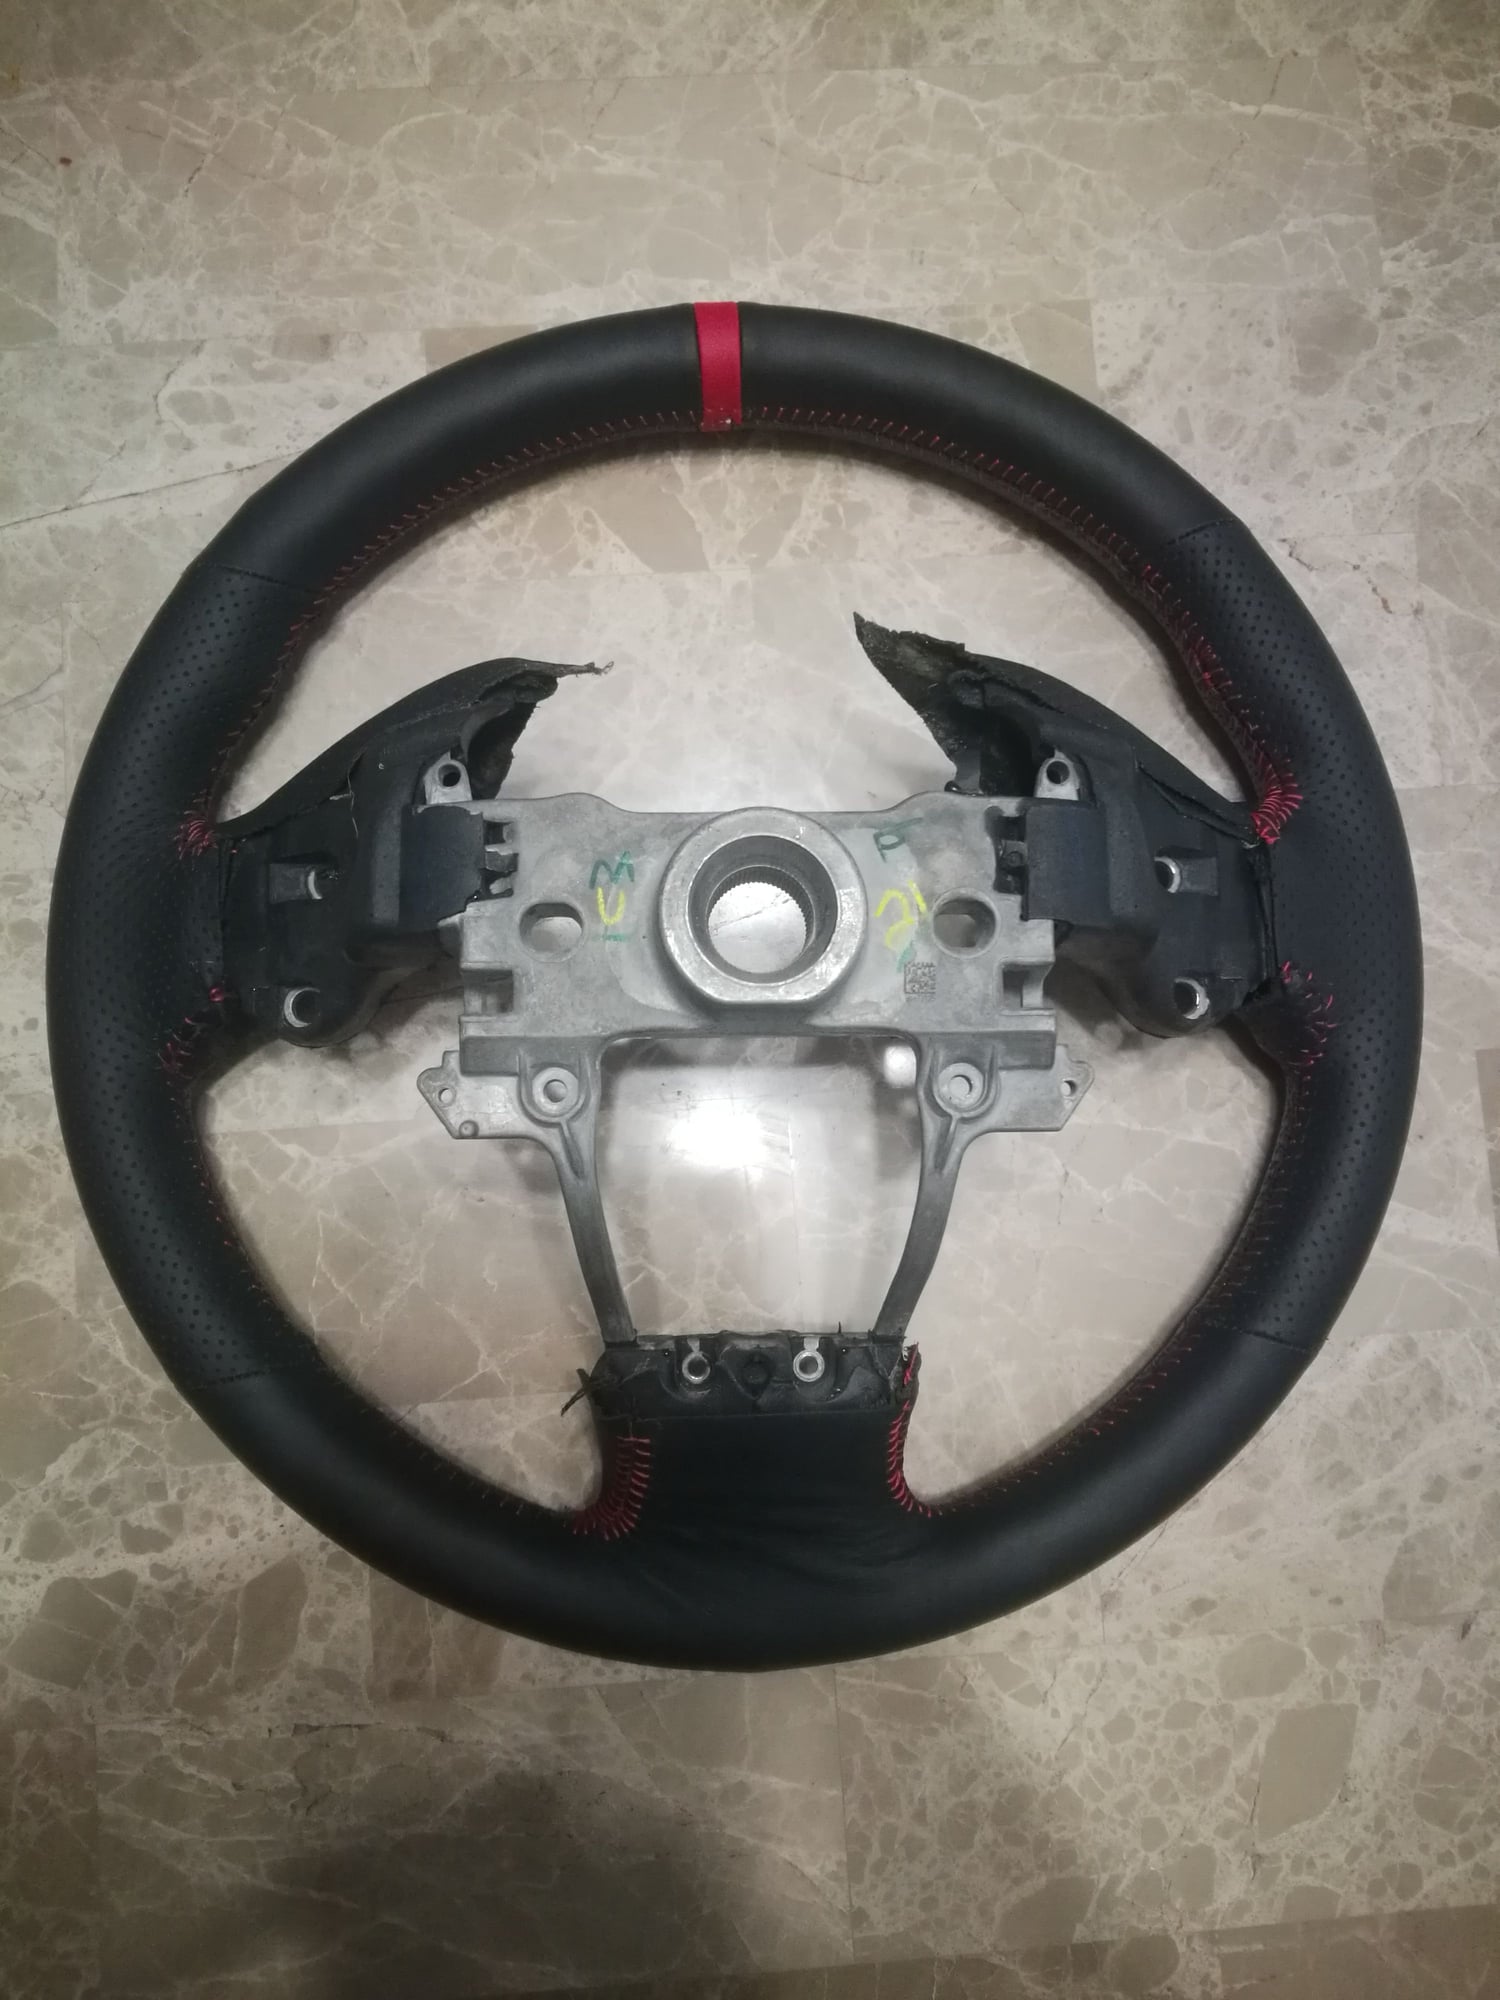 Interior/Upholstery - FS: Acura ILX Perforated Leather Steering Wheel - New - All Years Acura ILX - Baton Rouge, LA 70817, United States